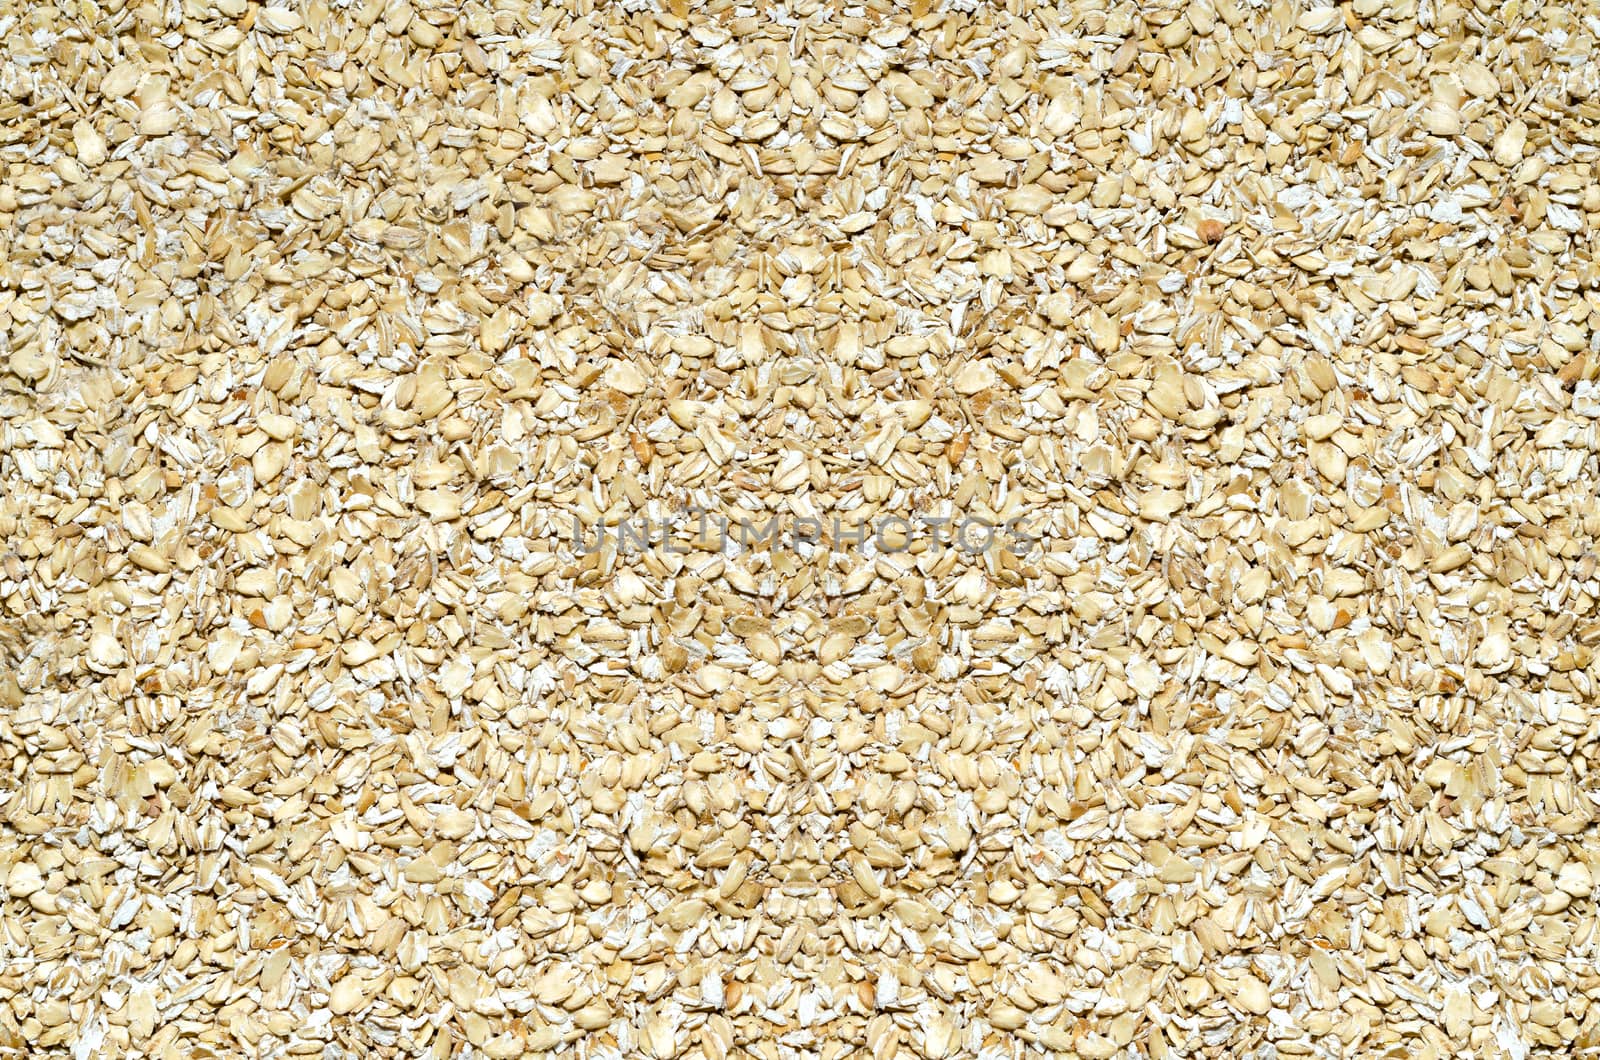 Background of oats rassypannoj on the surface by Gaina